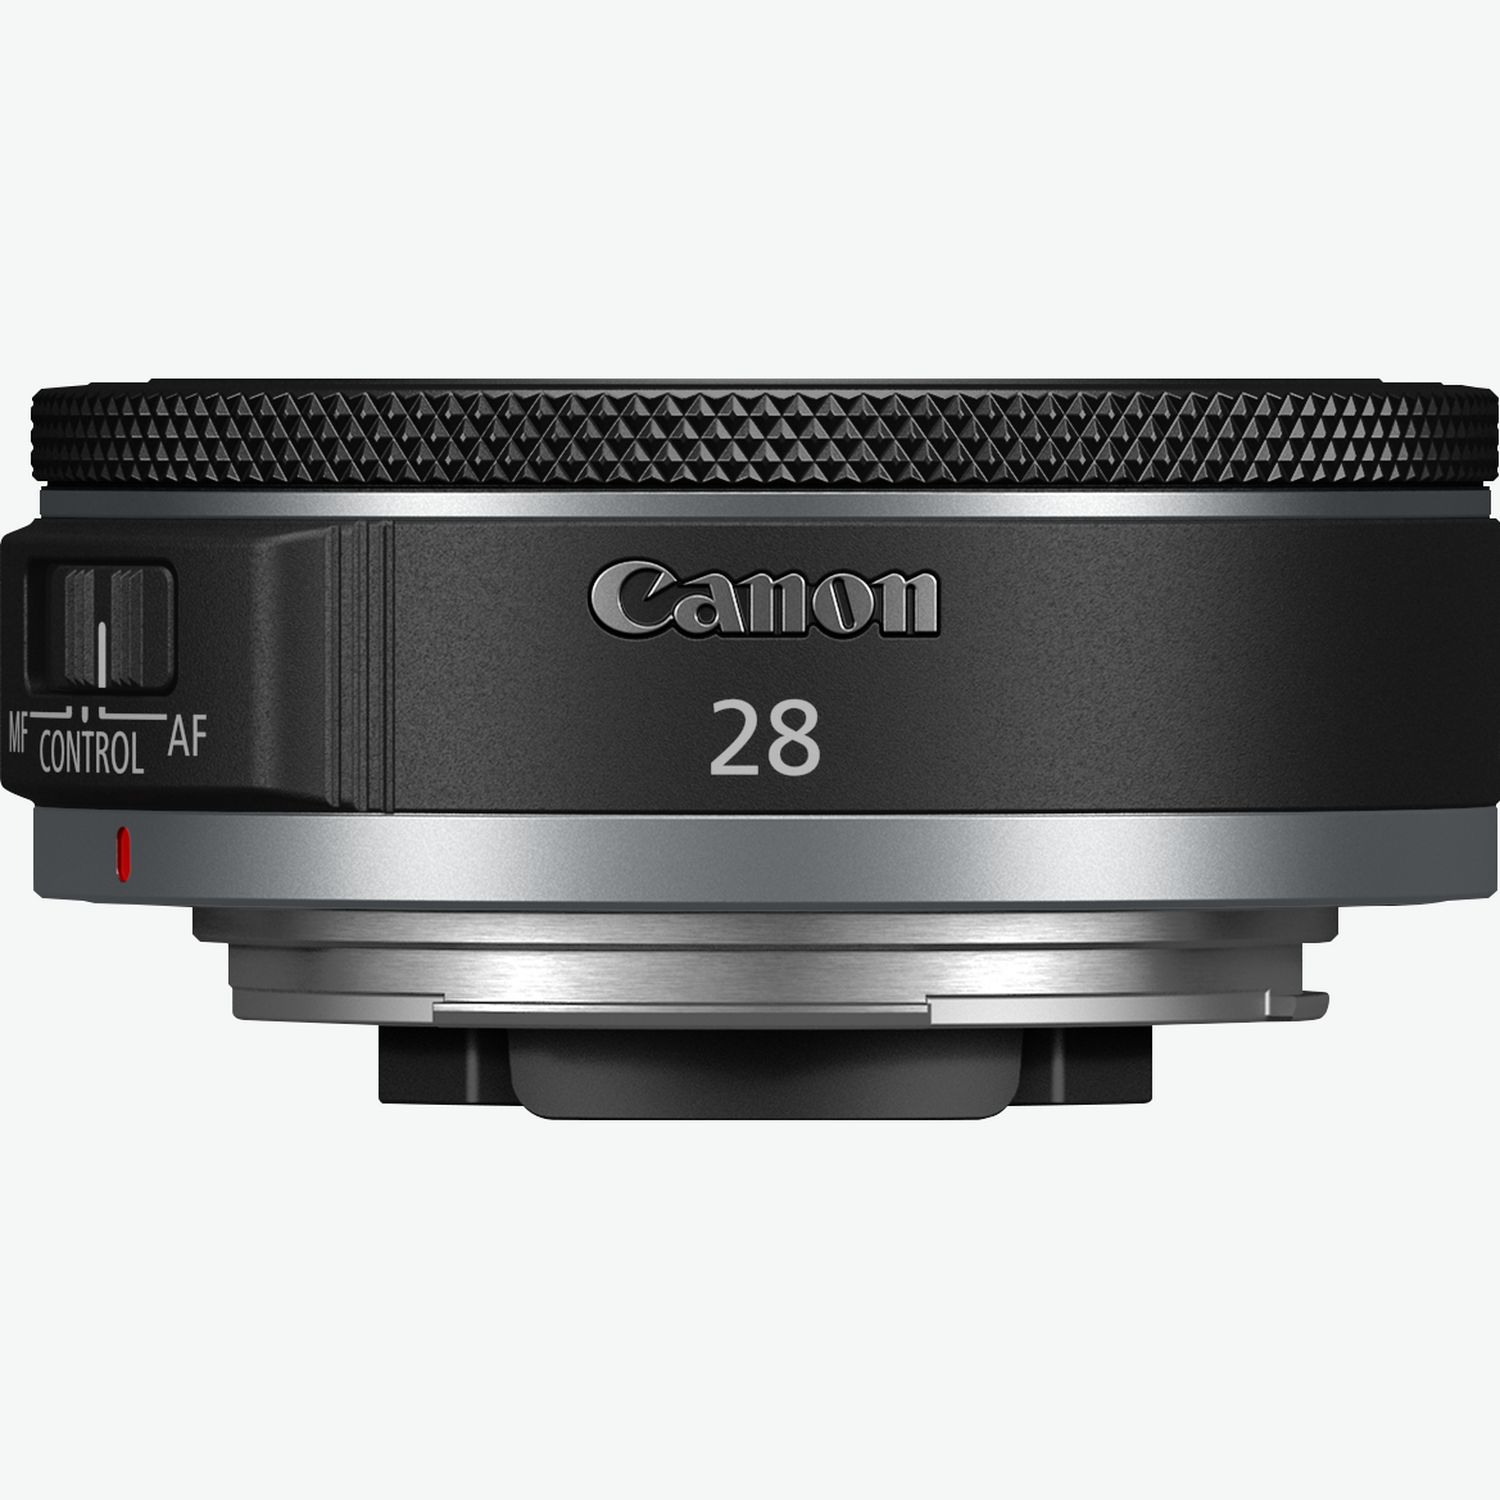 Buy Canon EOS R100 Mirrorless Camera + RF-S 18-45mm F4.5-6.3 IS STM Lens in  Wi-Fi Cameras — Canon Ireland Store